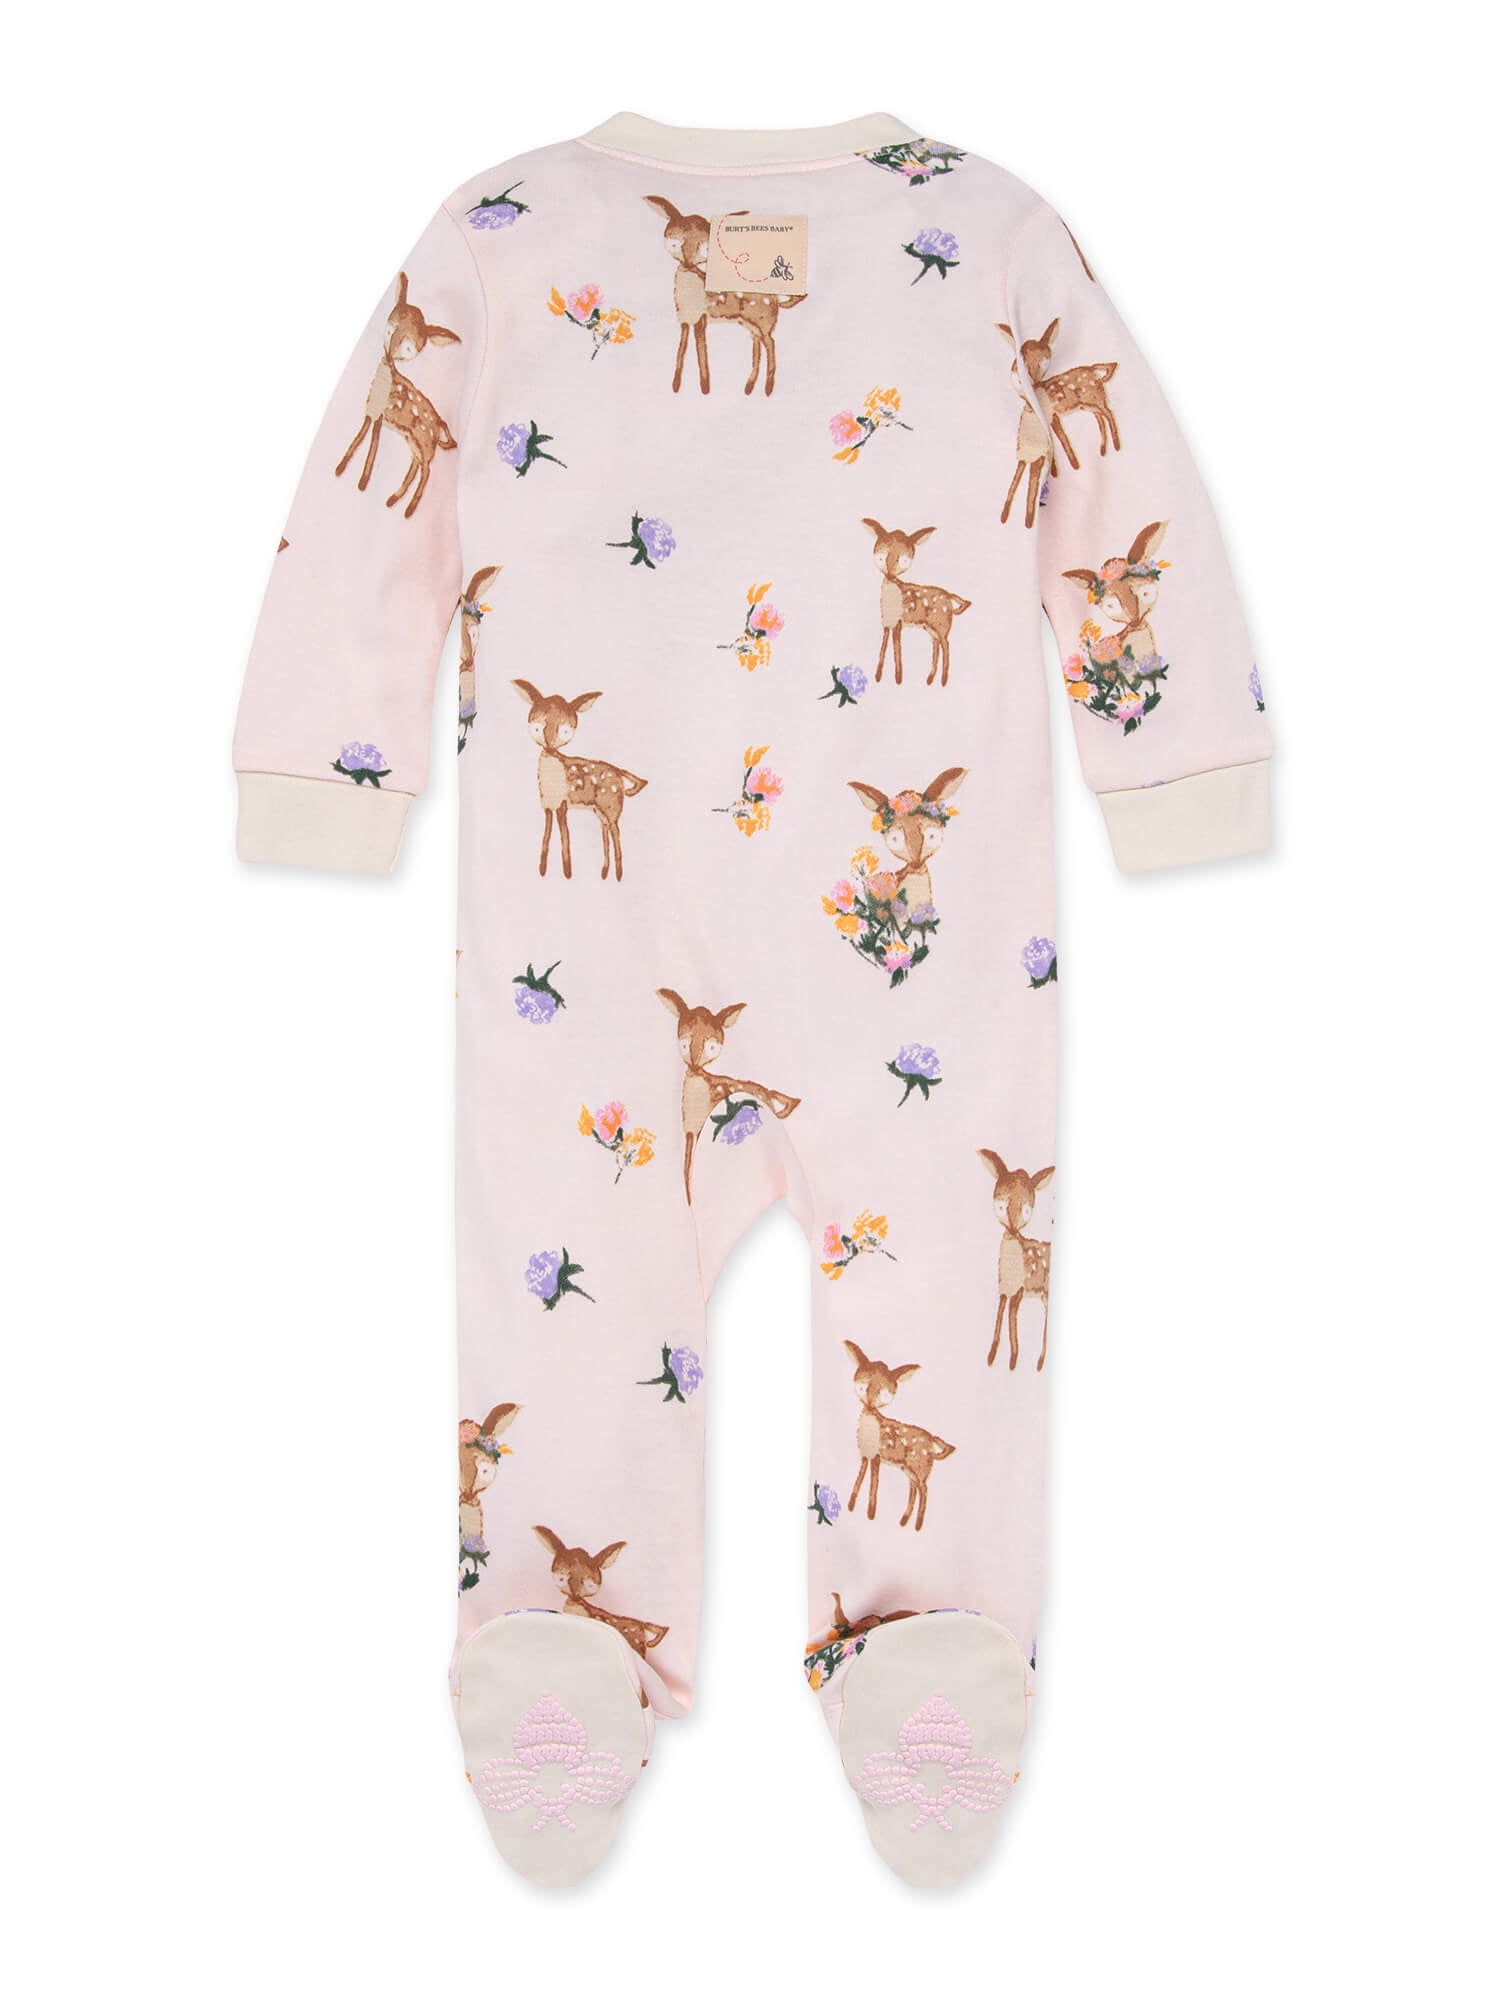 Button Front Footed Pajama Baby Unisex Baby Sleep & Play Organic One-Piece Romper-Jumpsuit PJ